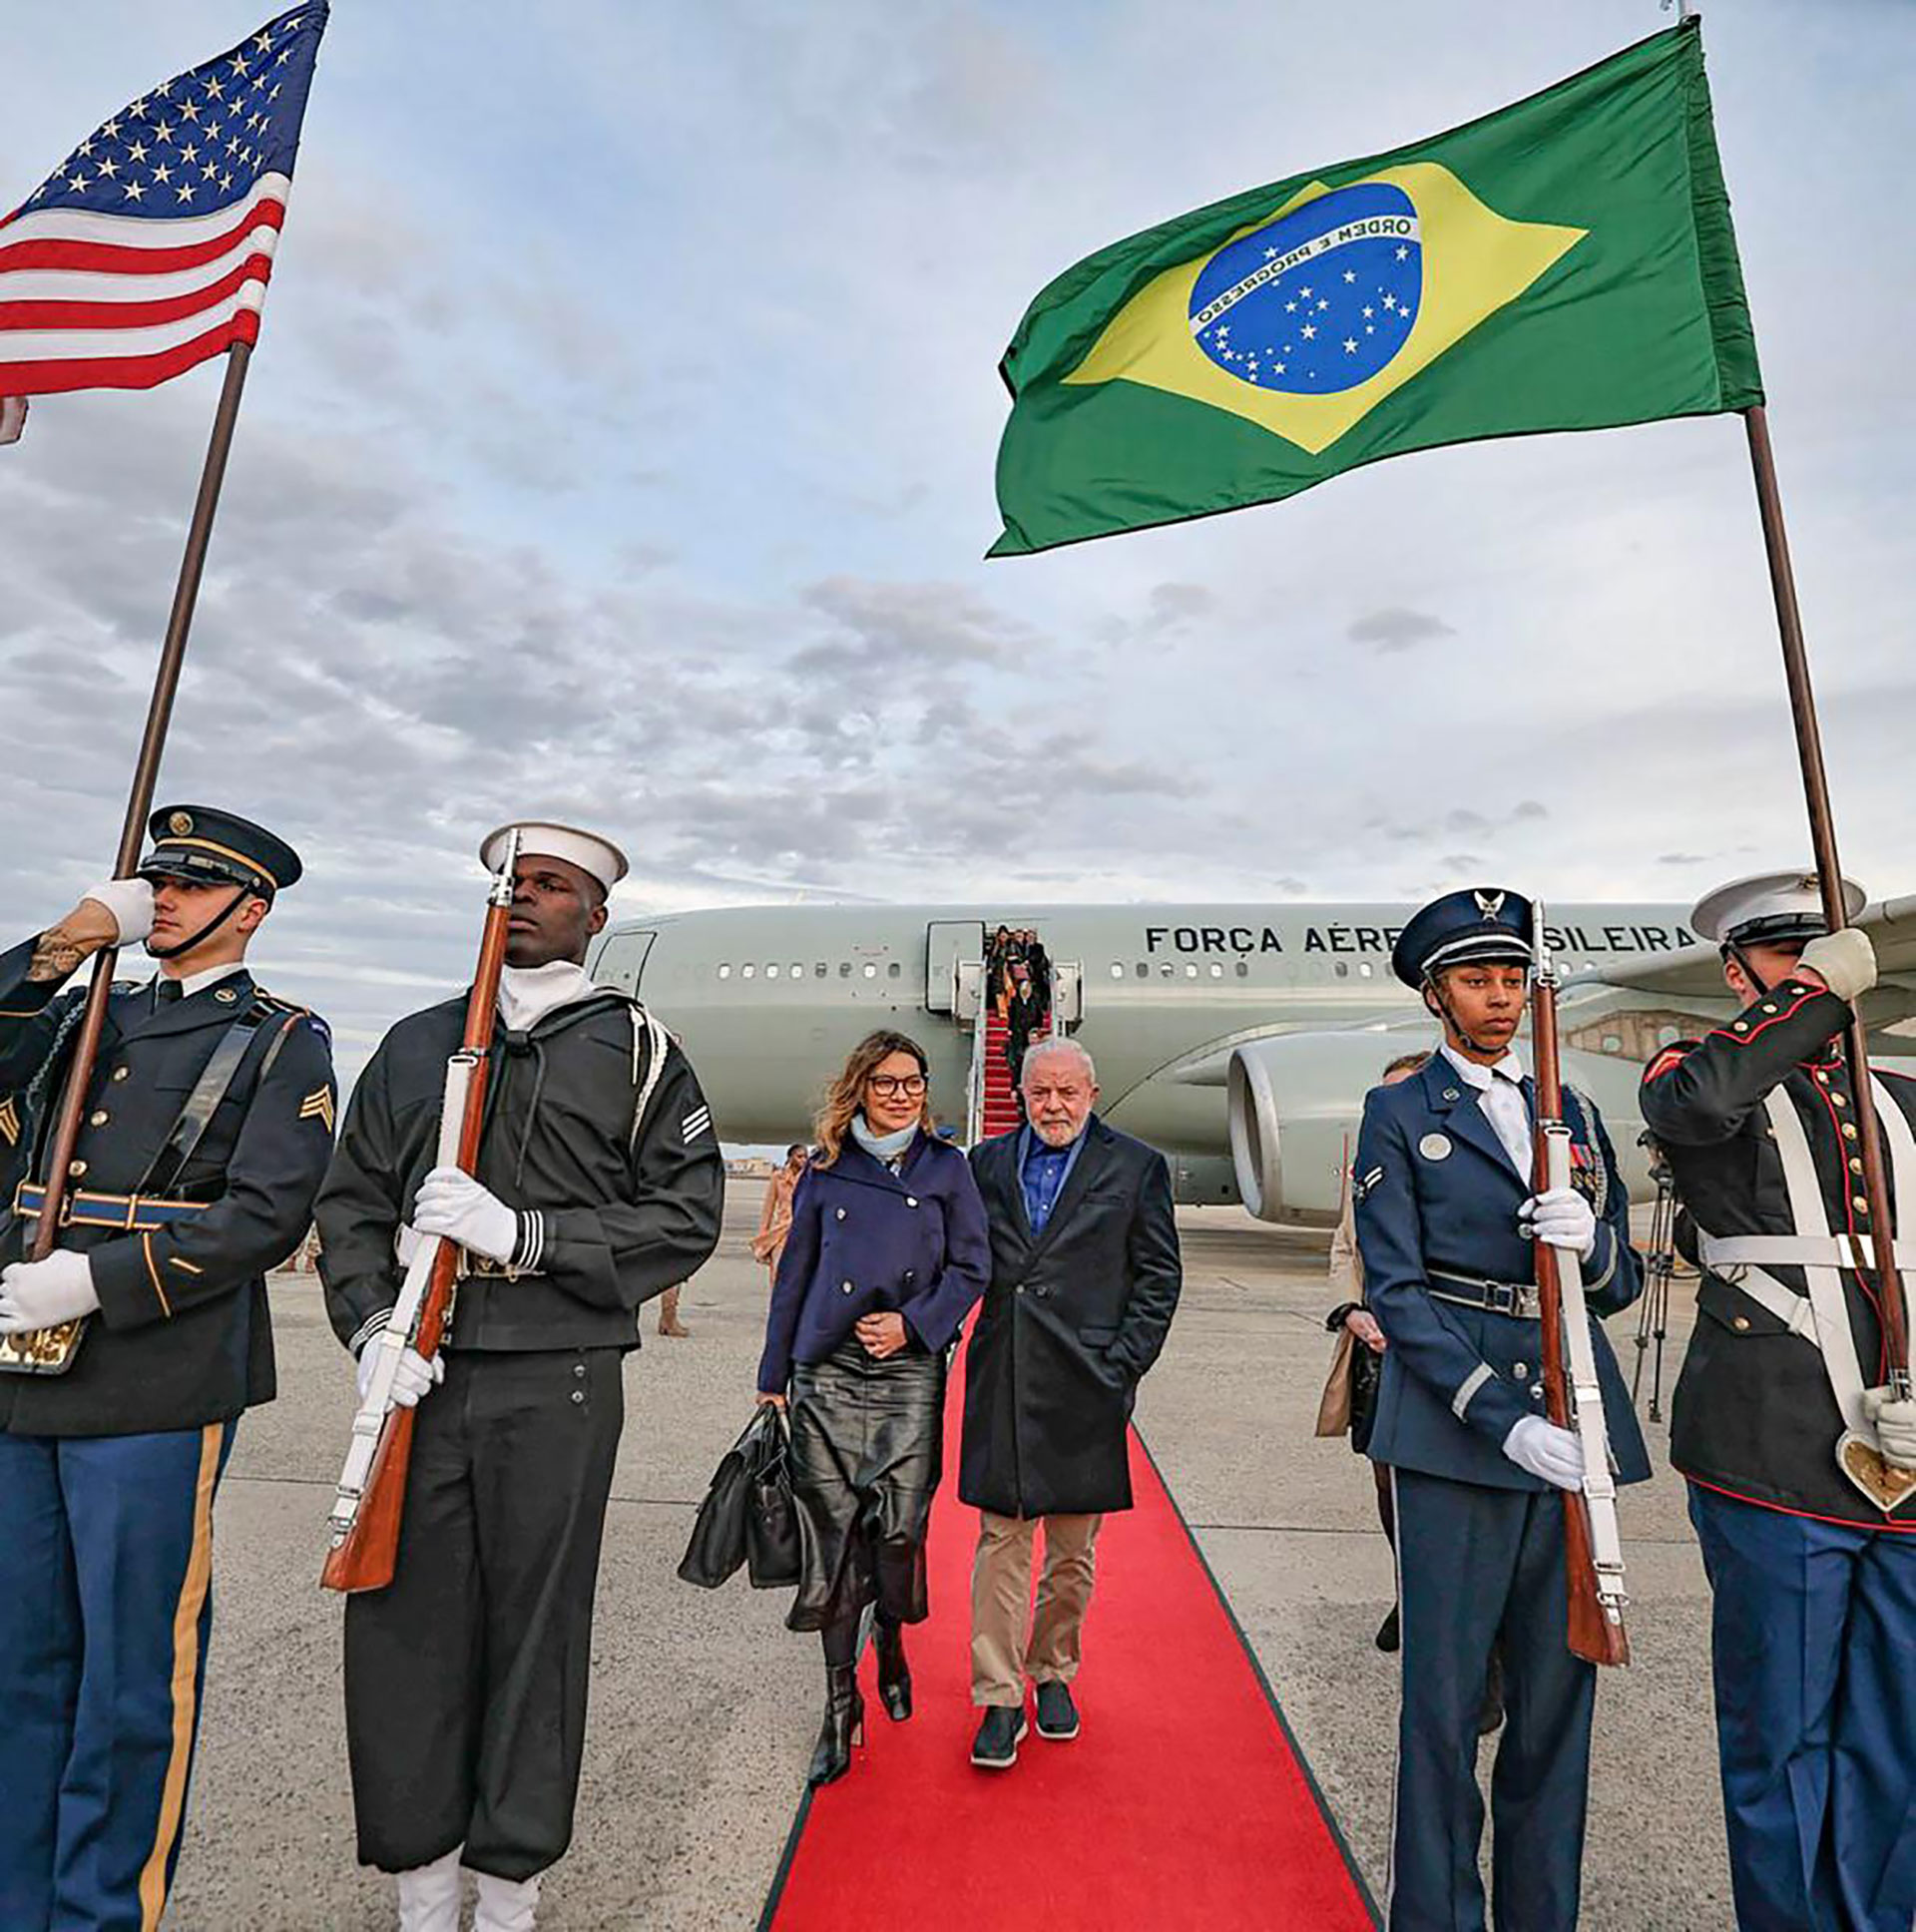 The arrival of Lula and his wife in the United States (Presidency of Brazil)